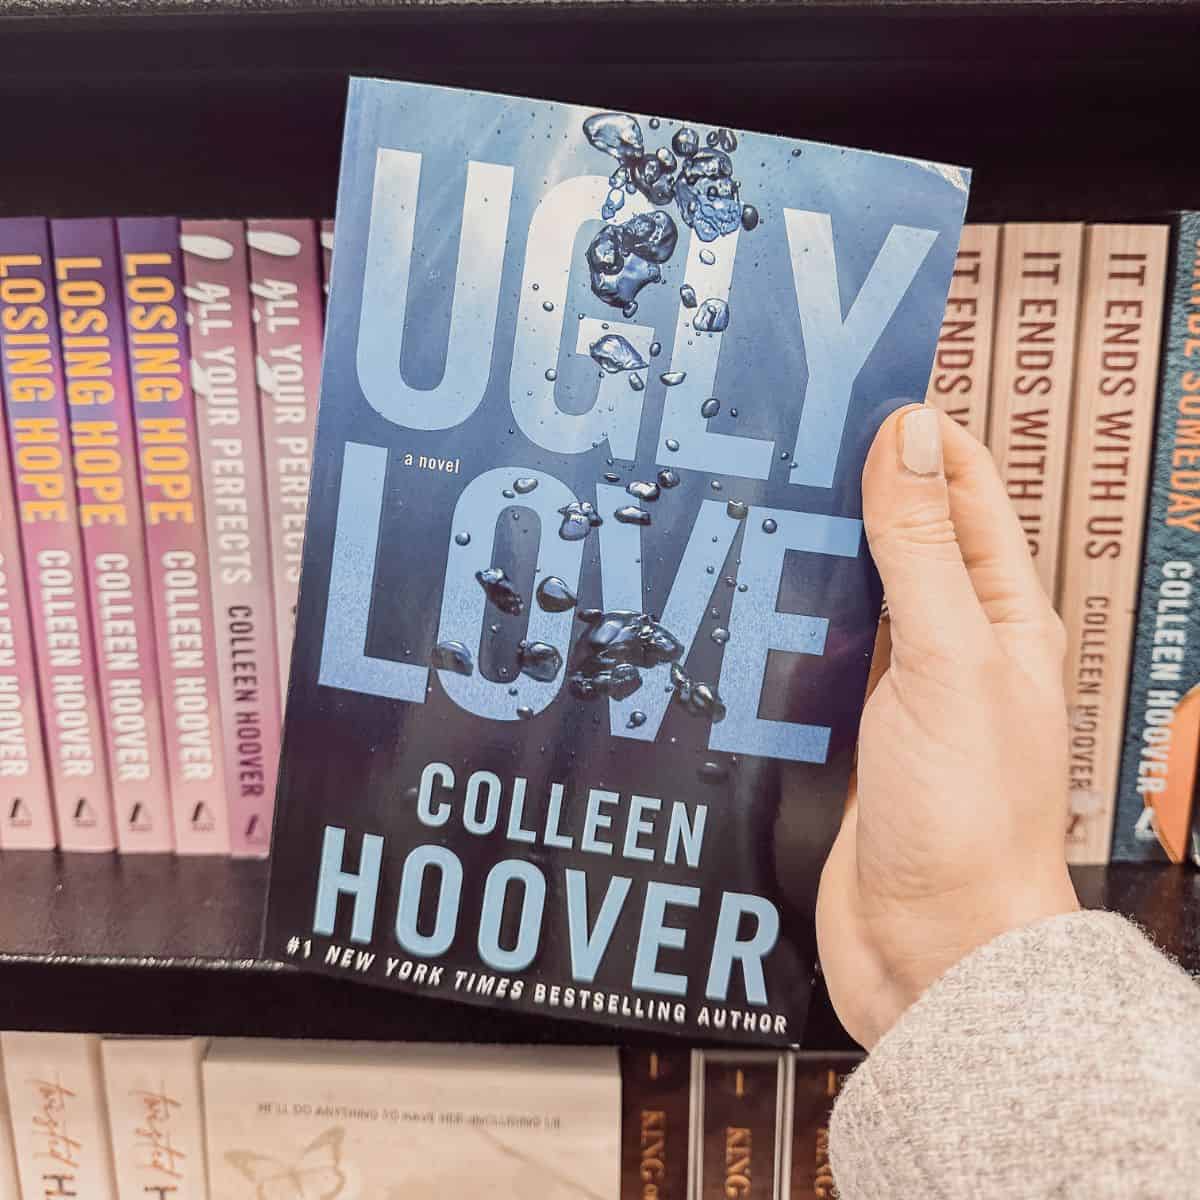 Ugly Love by Colleen Hoover held in front of a bookshelf with other Colleen Hoover books.